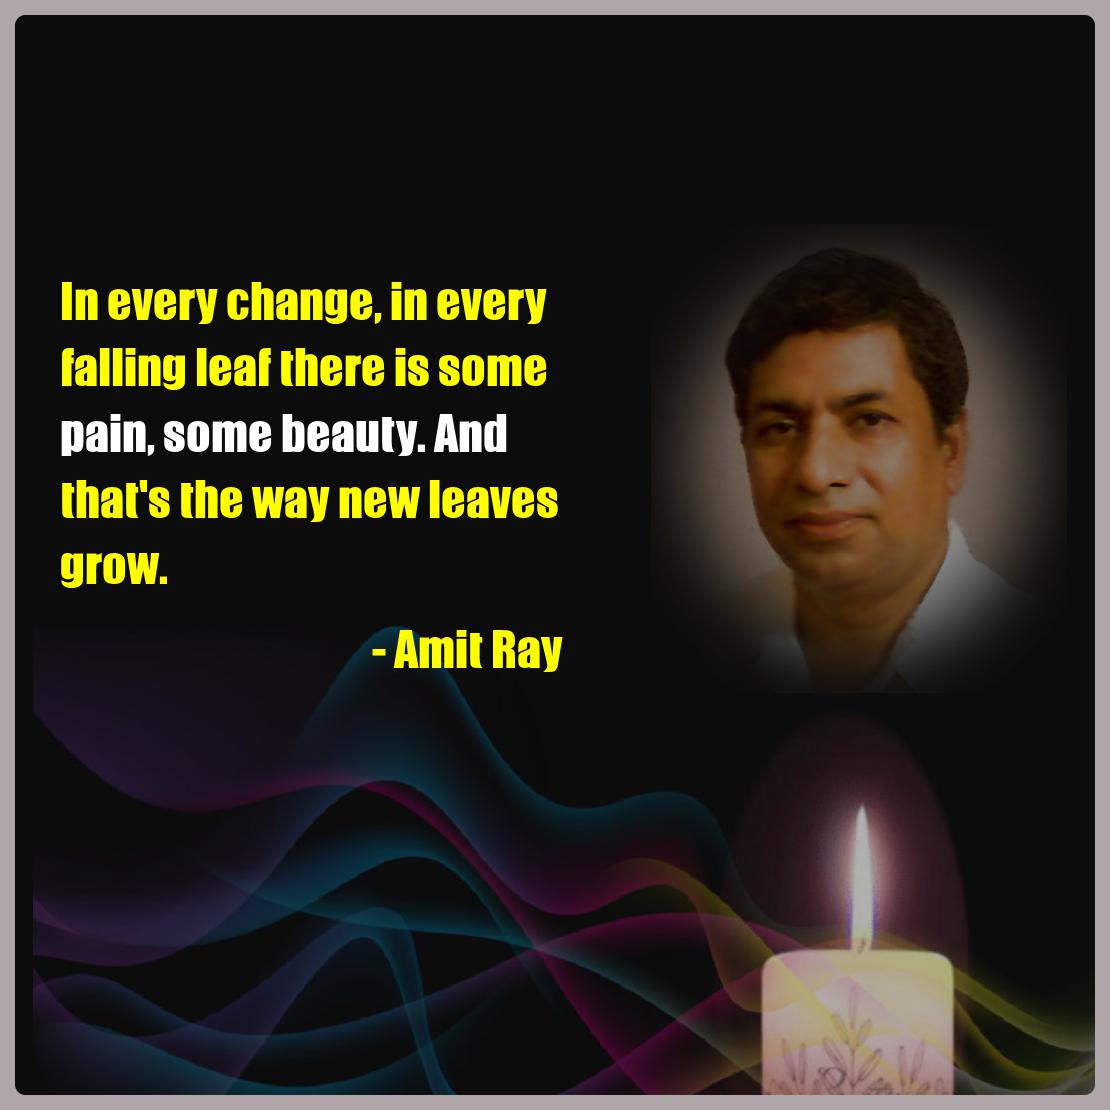 In every change, in every falling leaf there is some pain, some beauty. And that's the way new leaves grow. -- Amit Ray